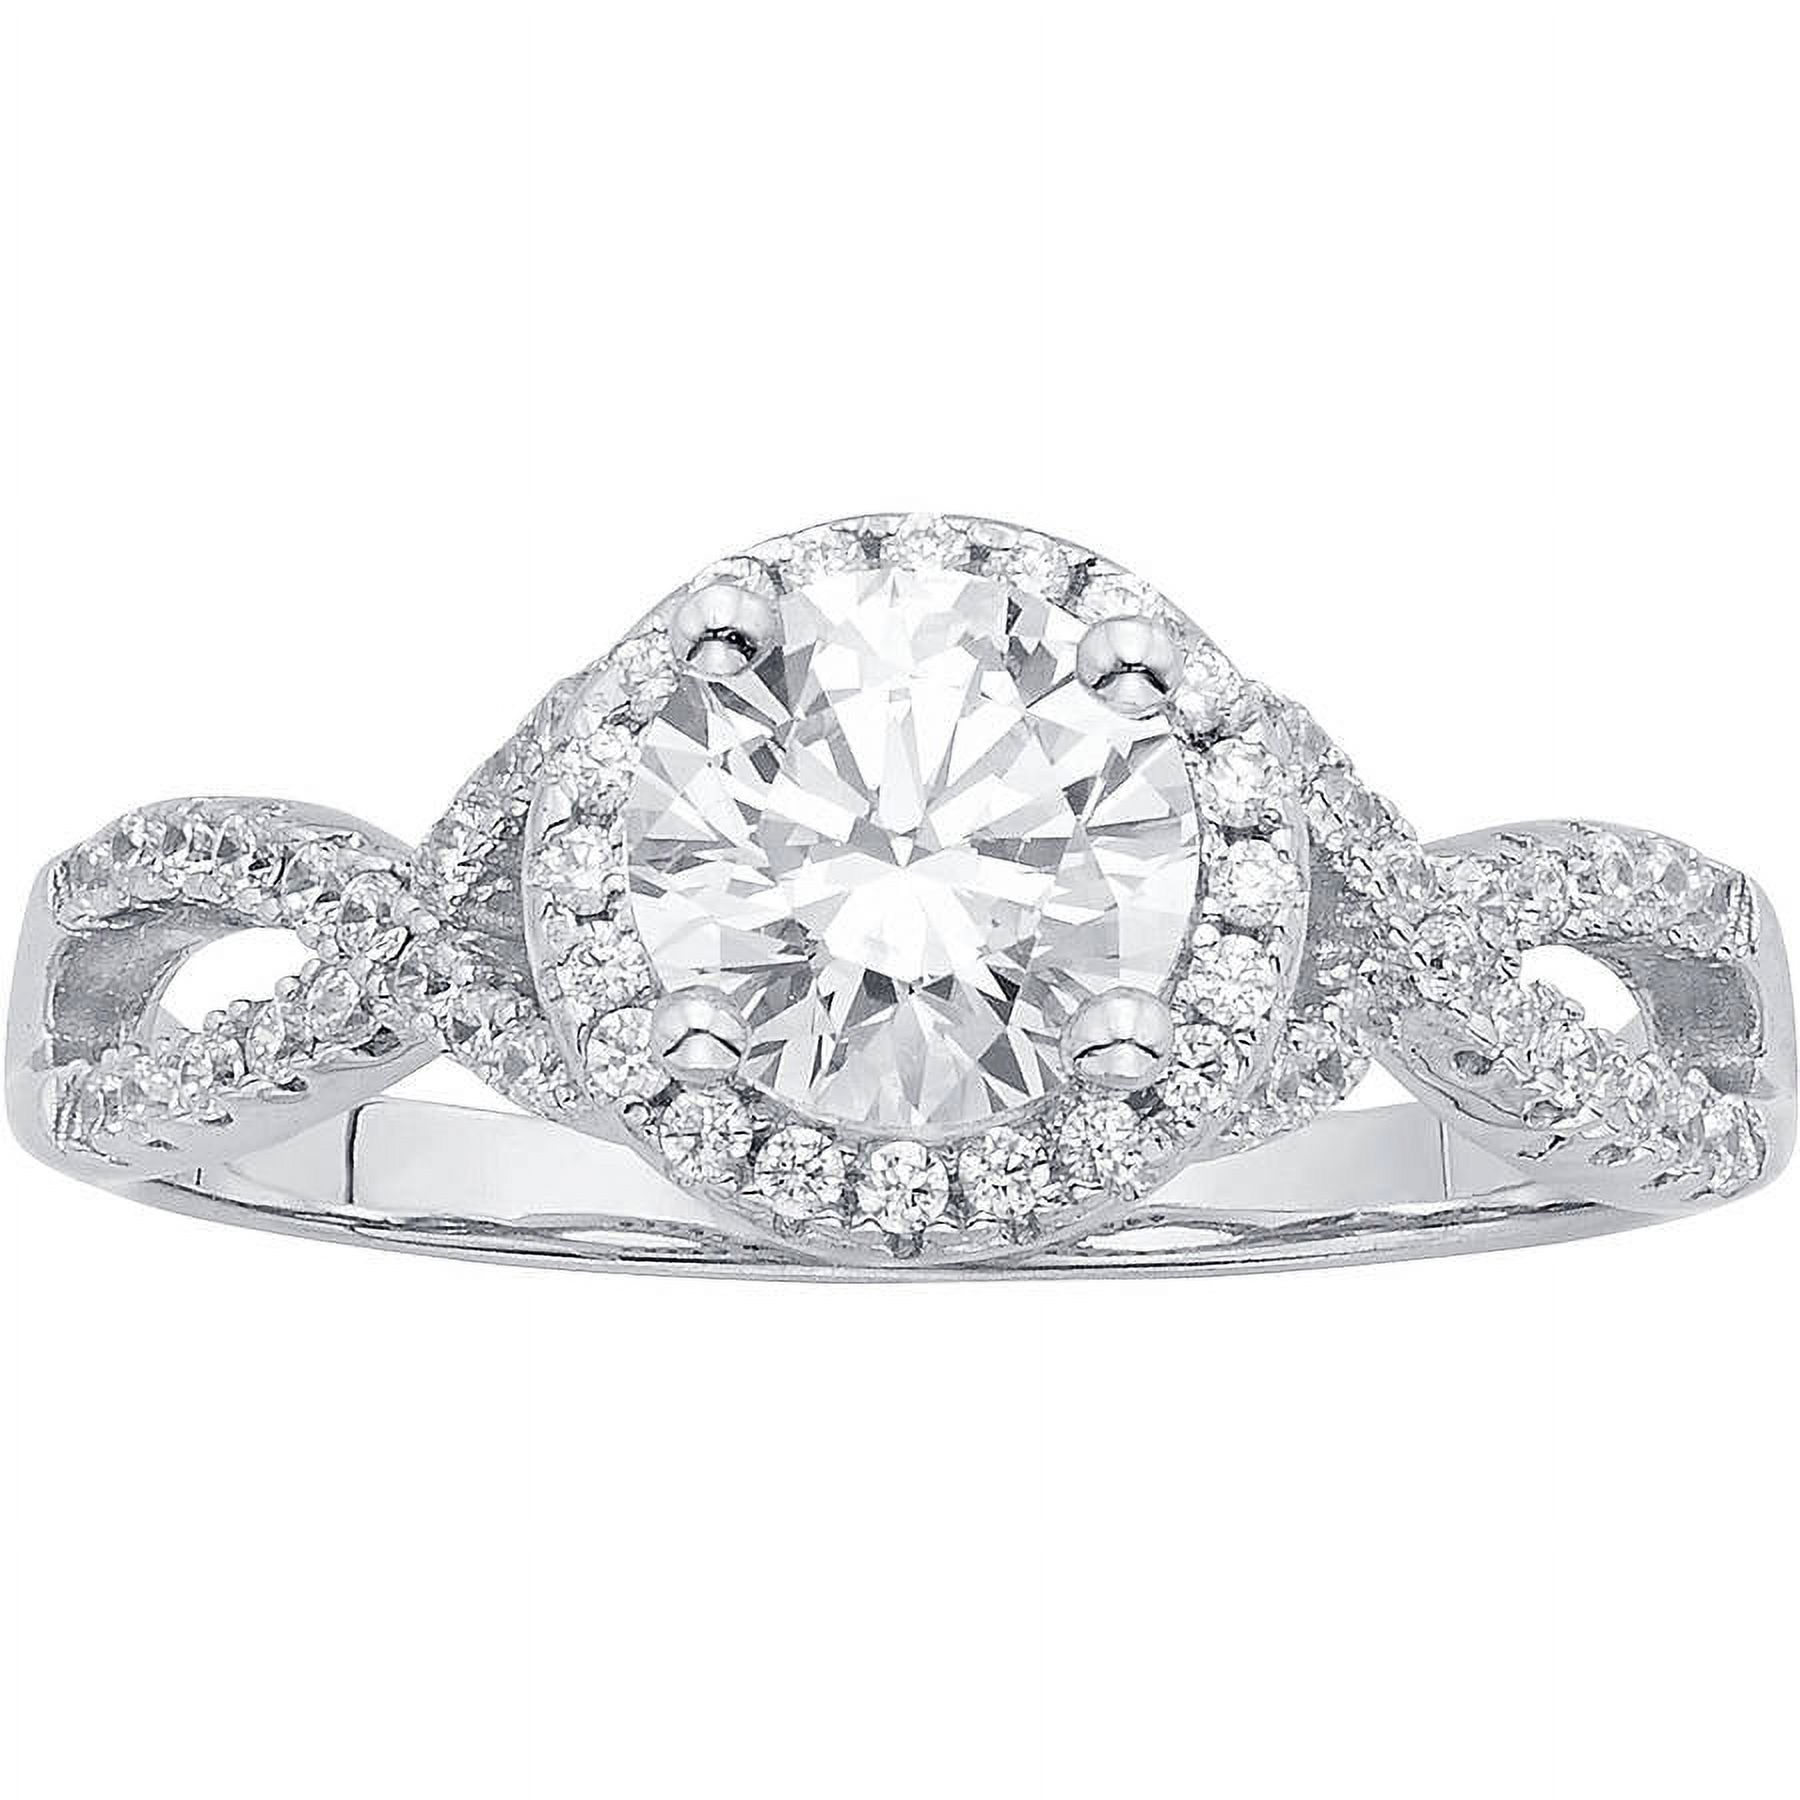 1/2 Carat T.G.W. Australian Crystal and CZ Sterling Silver Engagement Ring - image 2 of 3